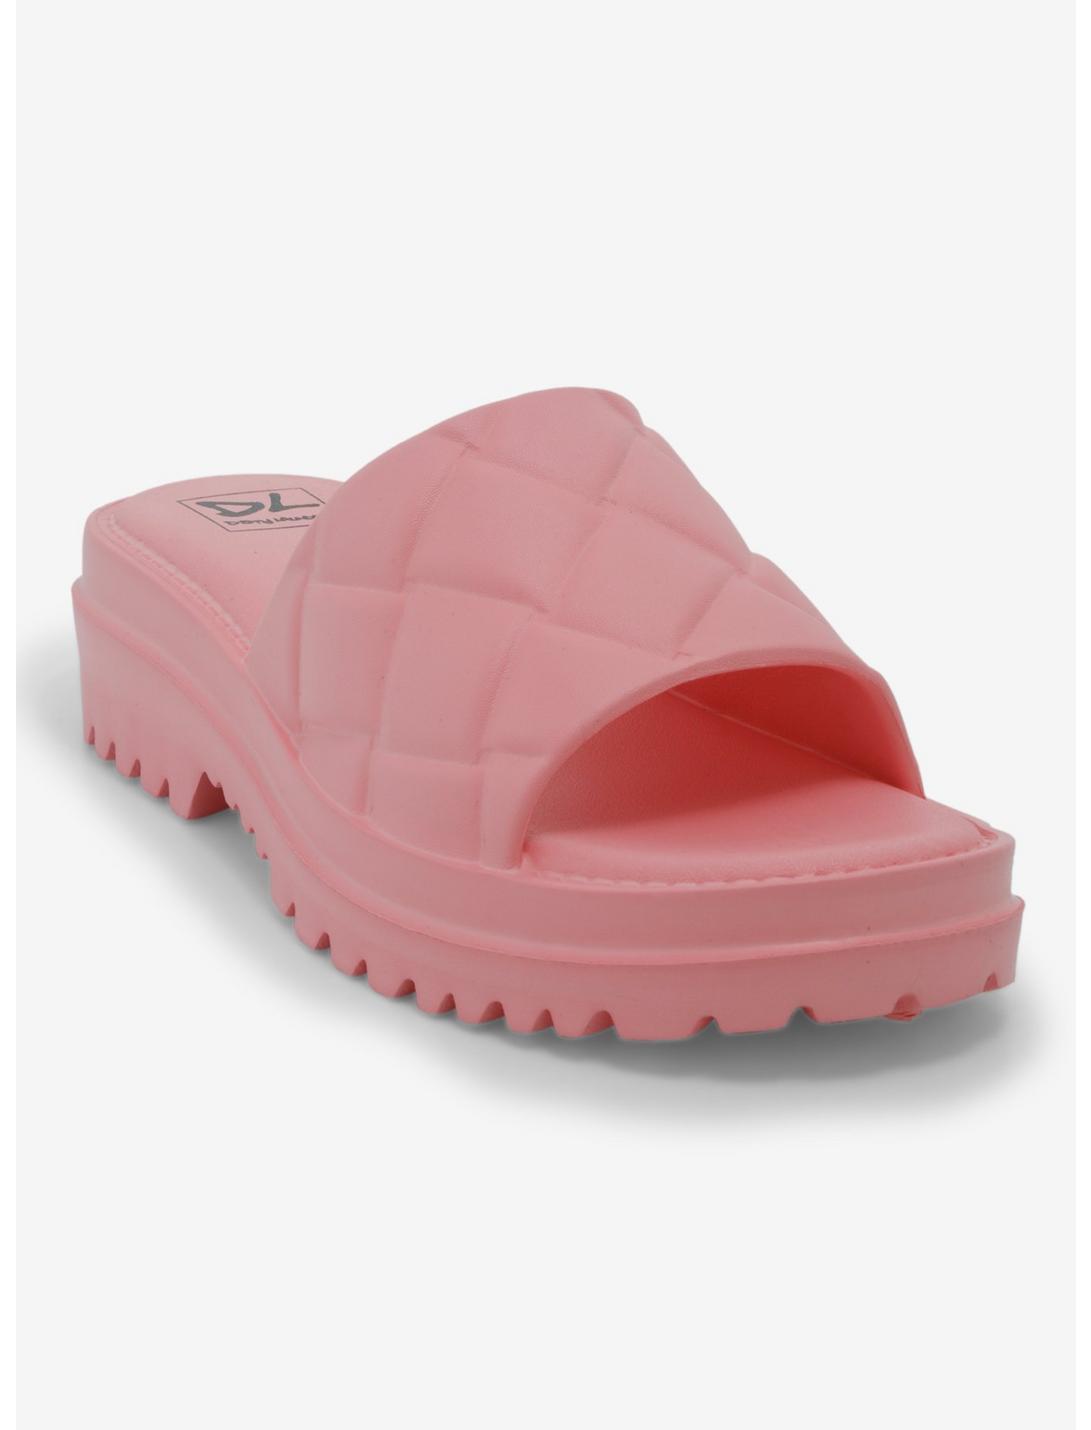 Dirty Laundry Pink Foam Chunky Sandals, PINK, hi-res